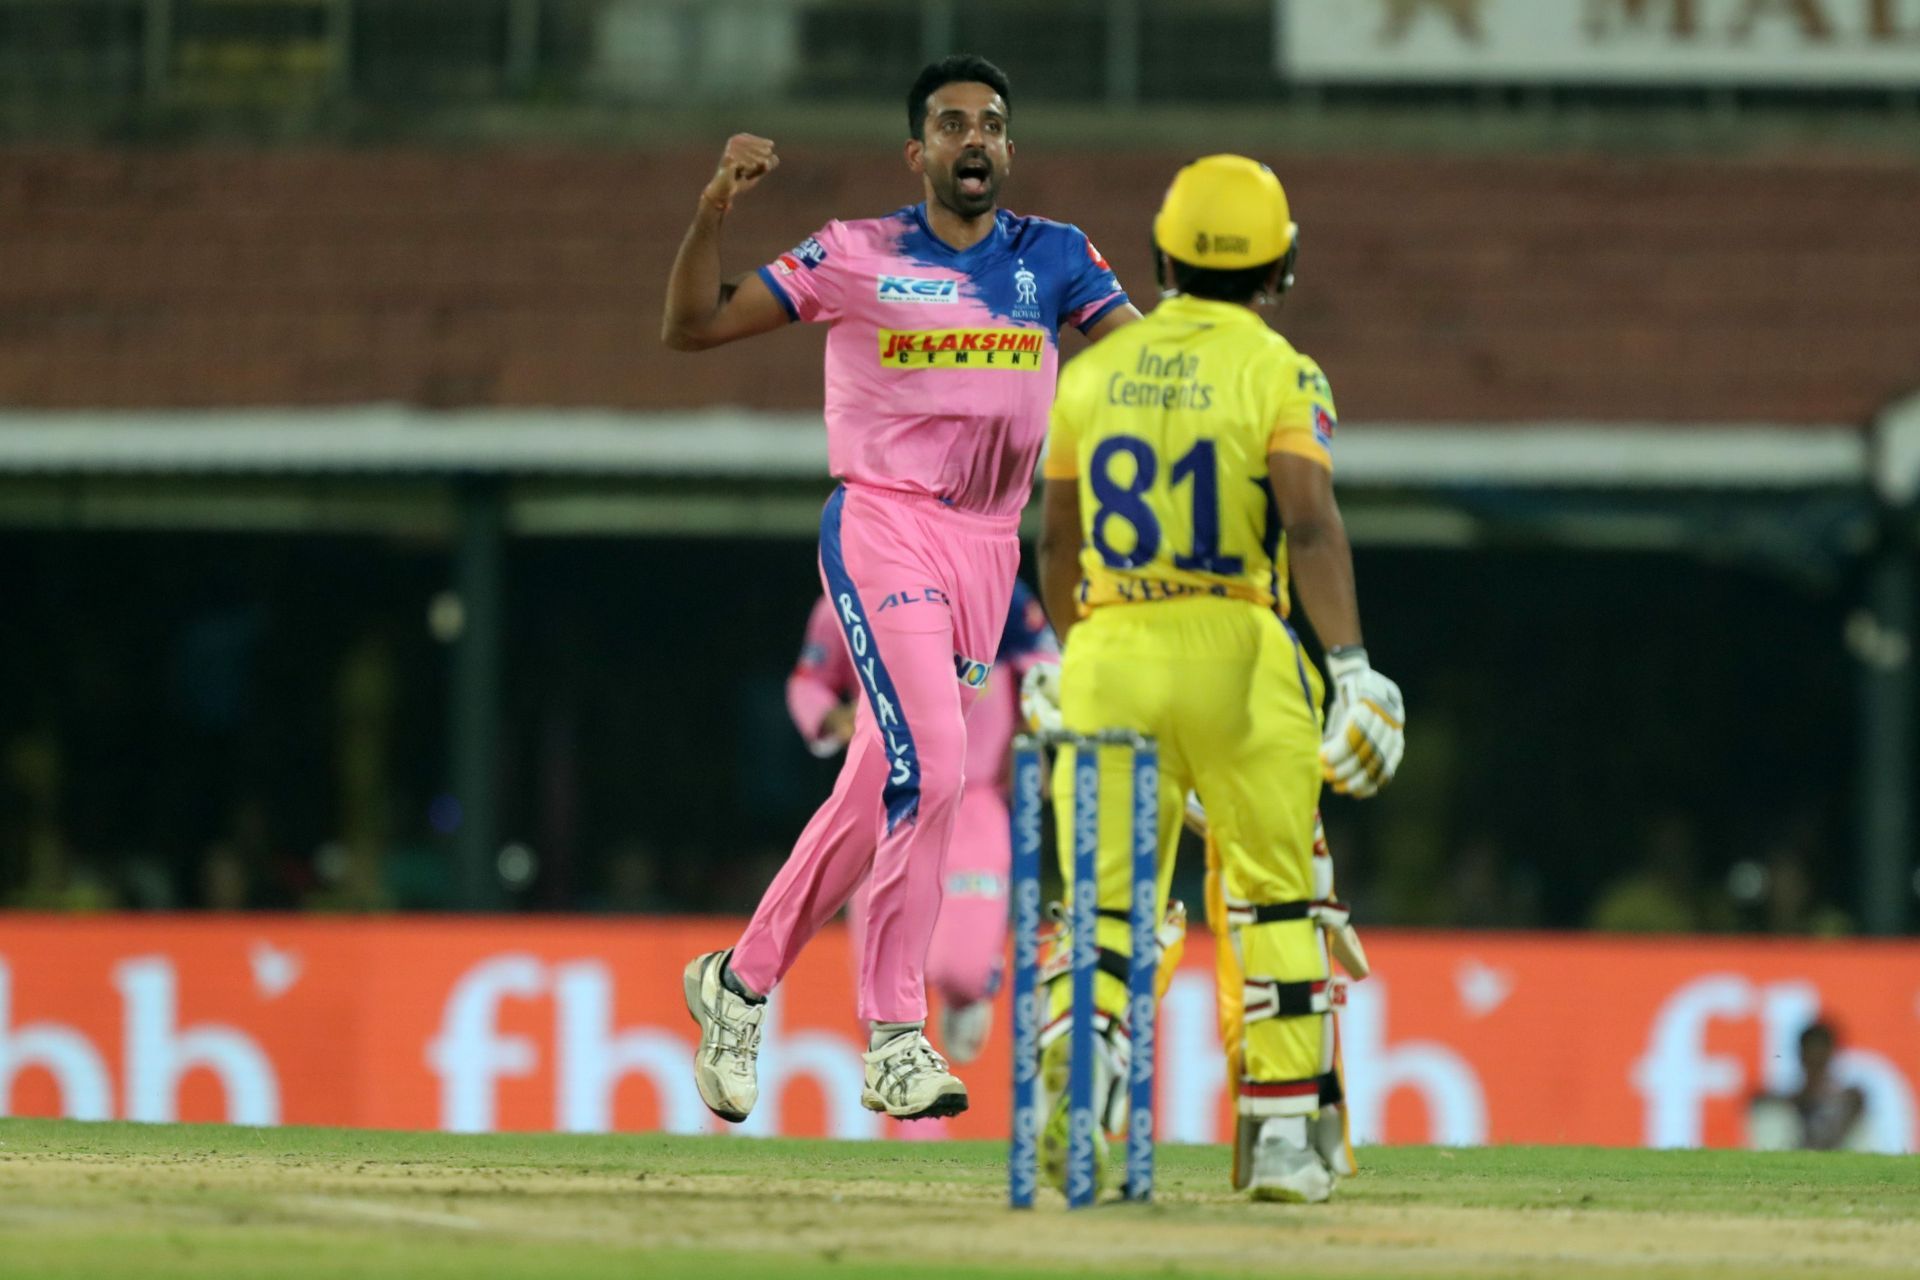 Dhawal Kulkarni finds himself without an IPL franchise right now